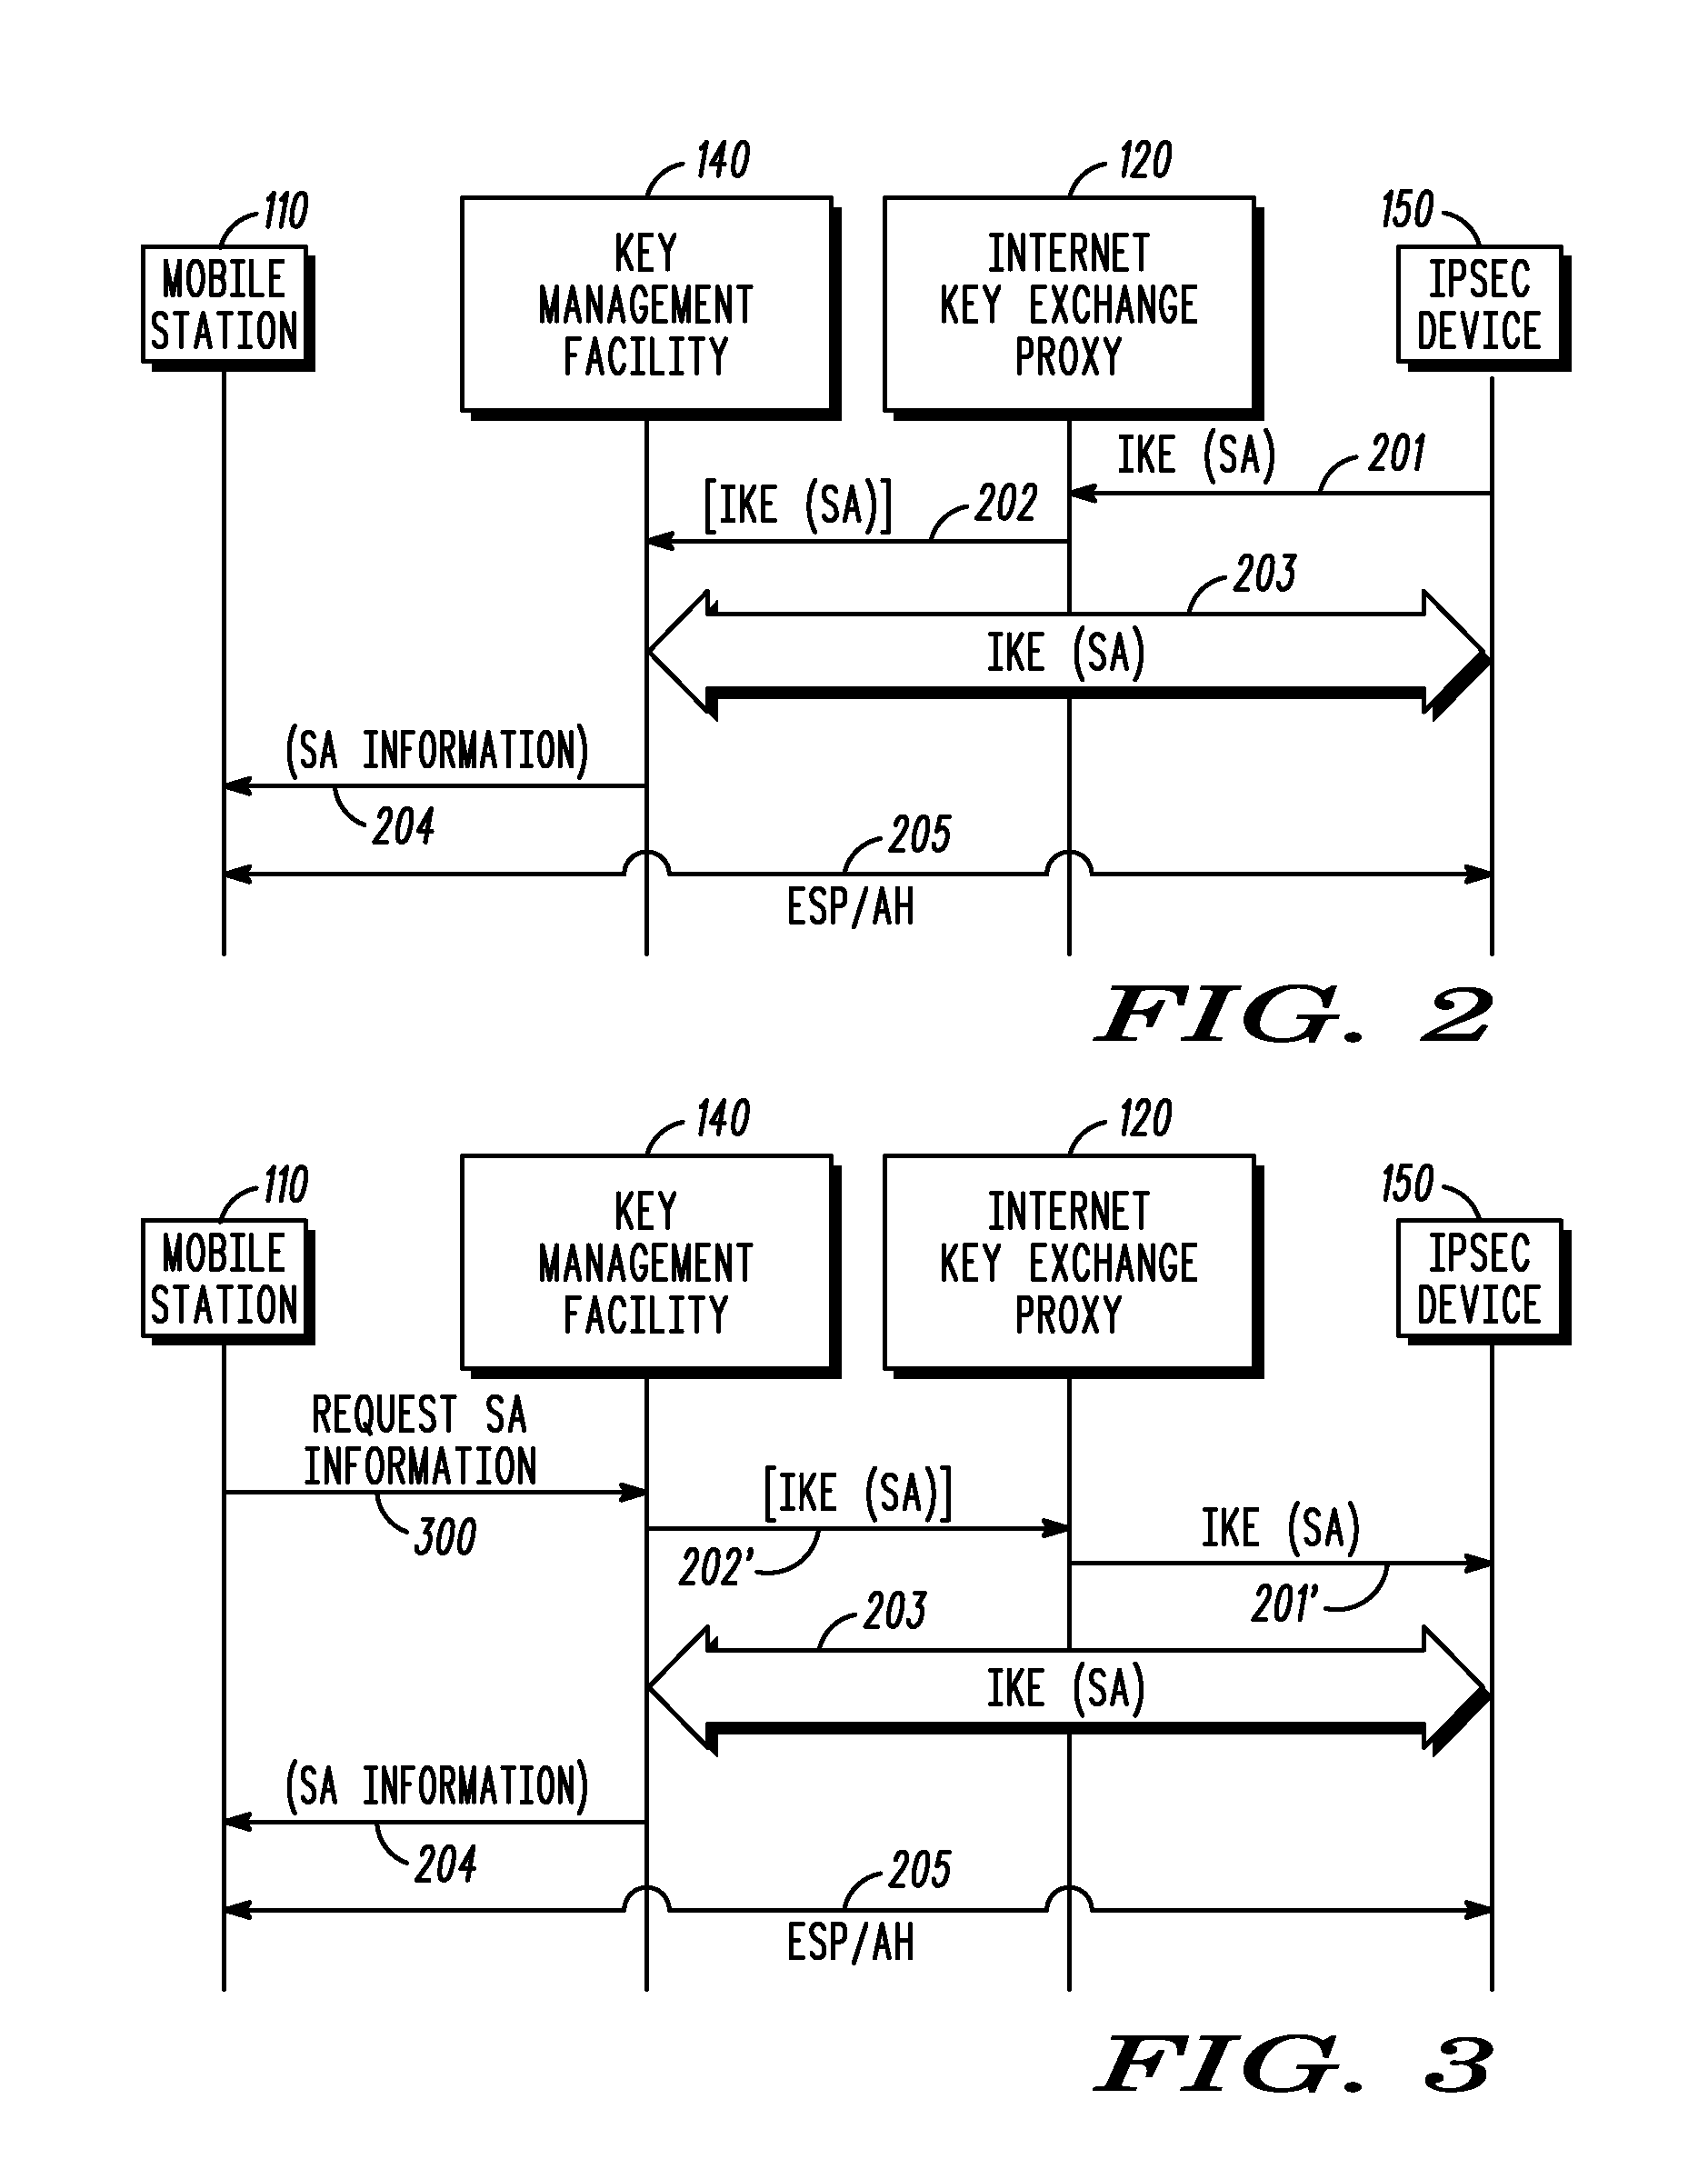 Method and system for using a key management facility to negotiate a security association via an internet key exchange on behalf of another device